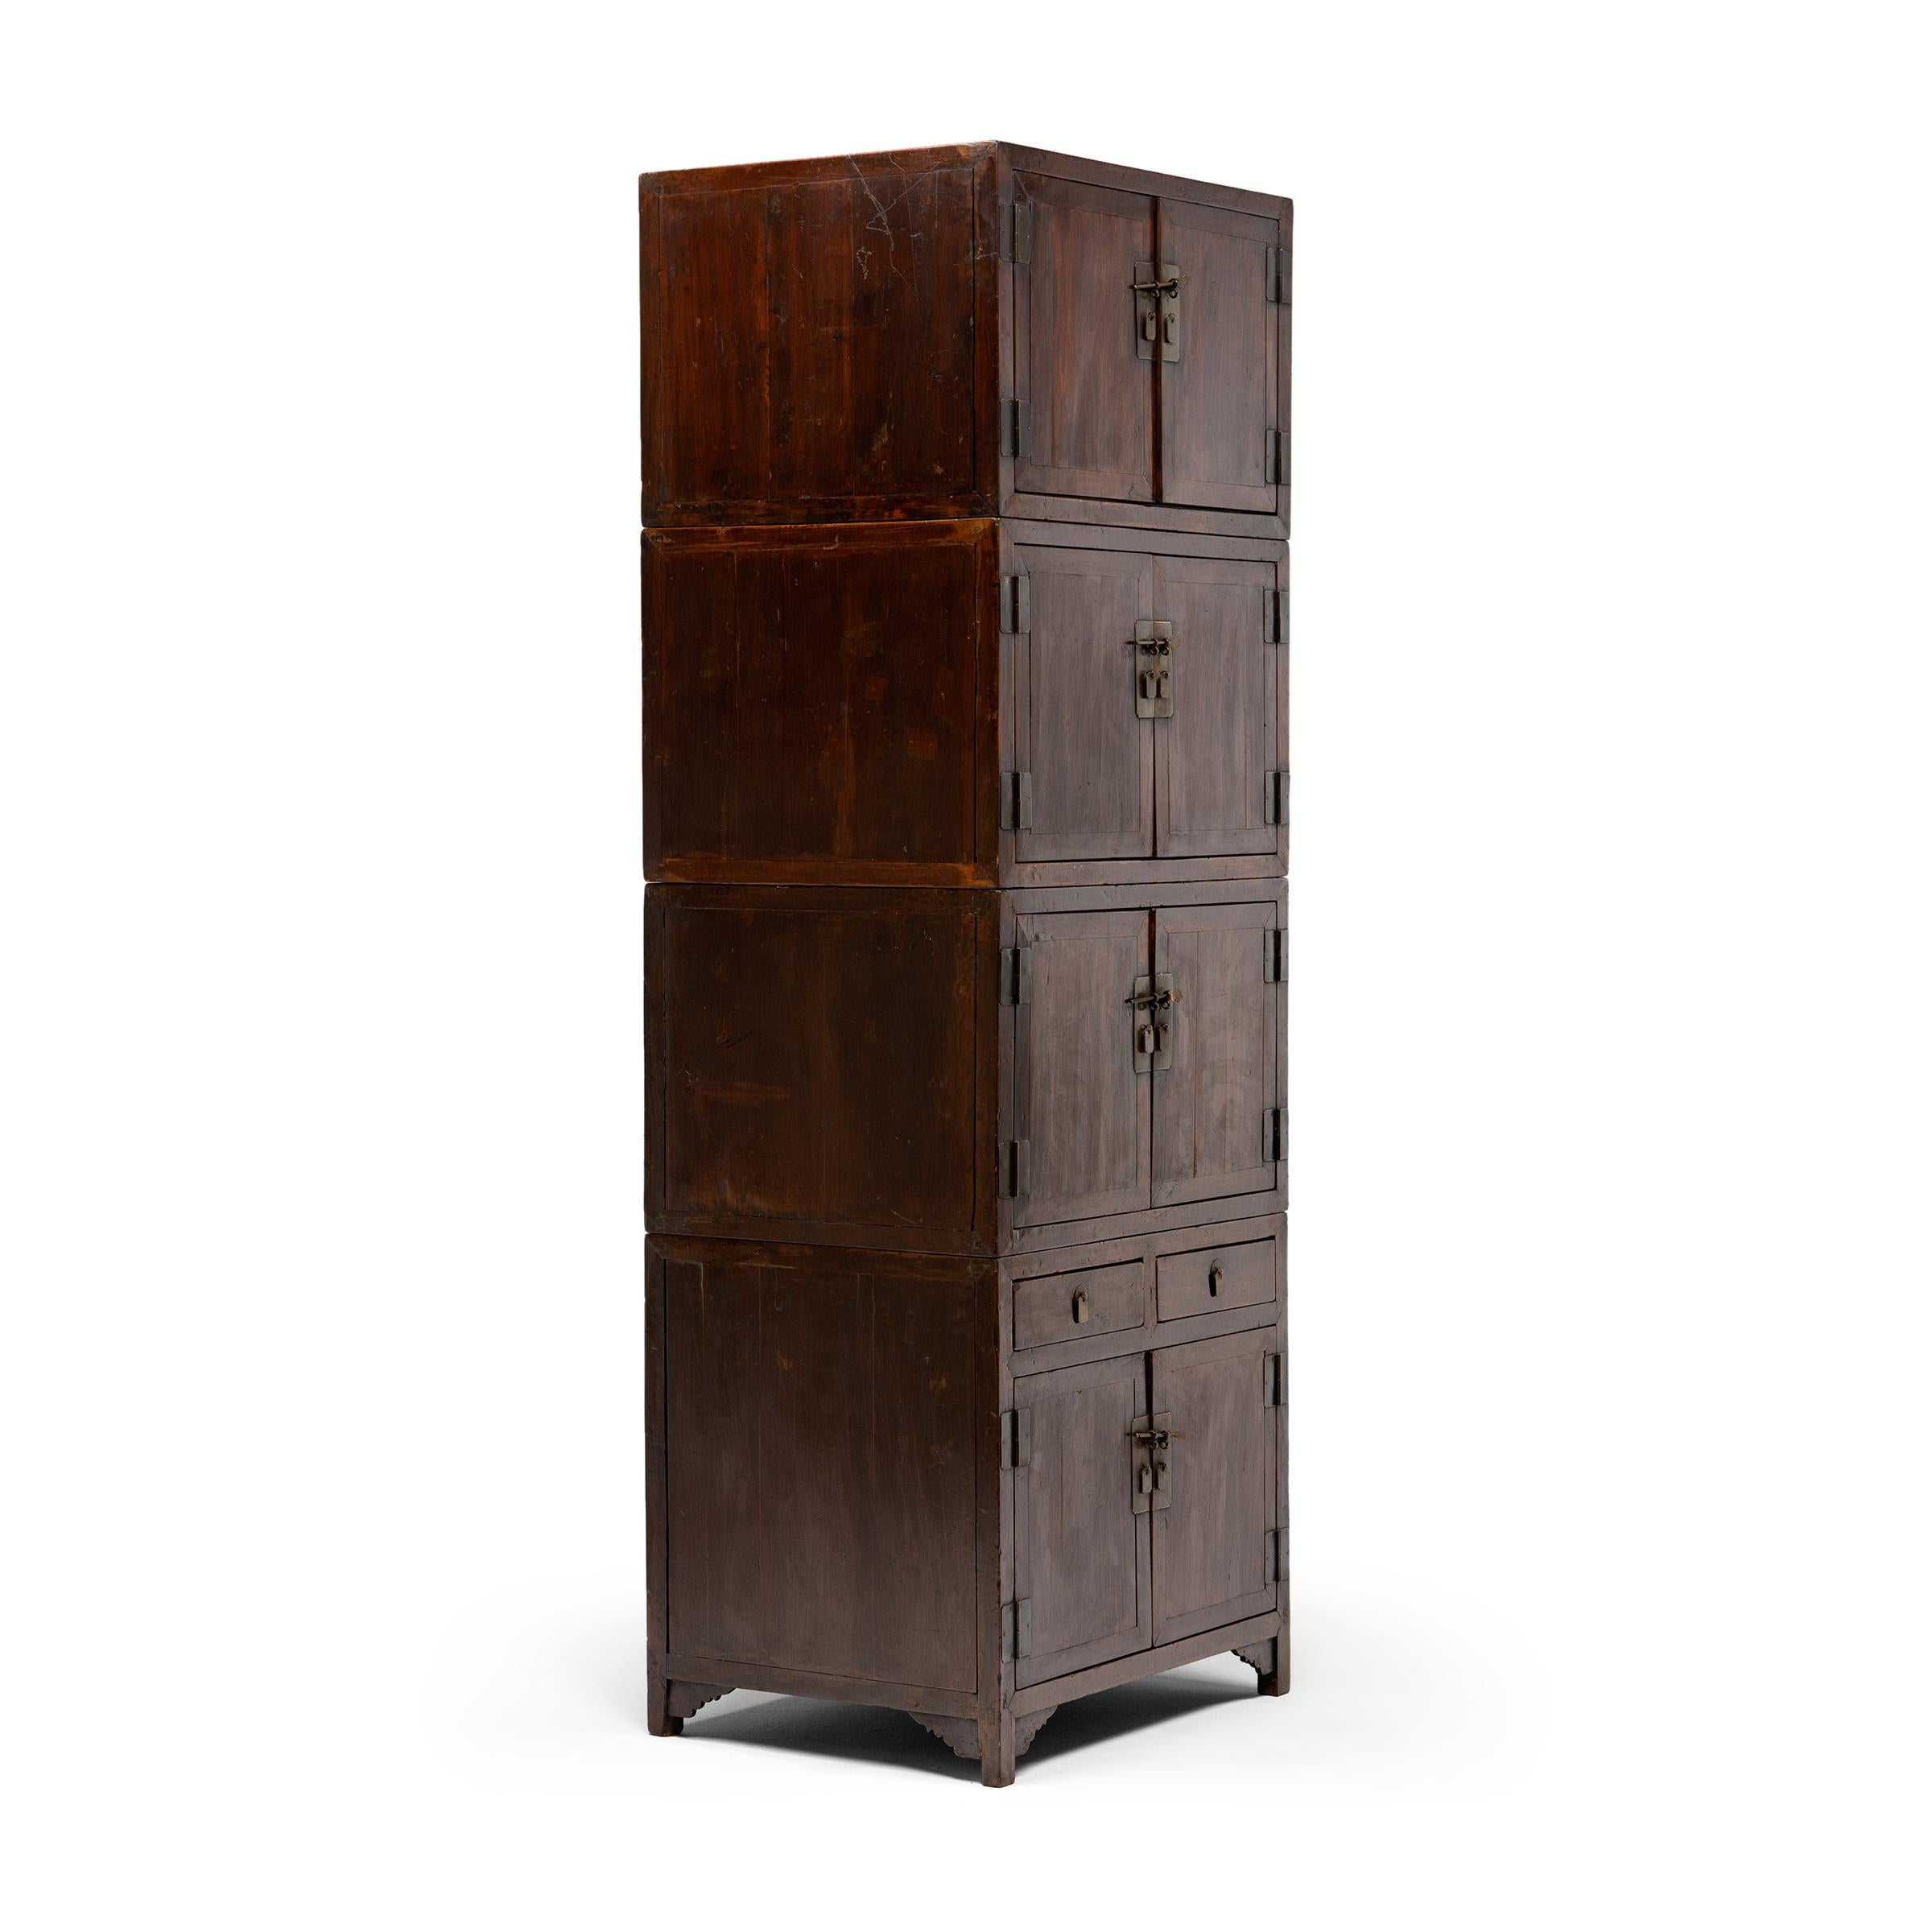 Four Piece Chinese Stacking Cabinet, c. 1930 For Sale 2